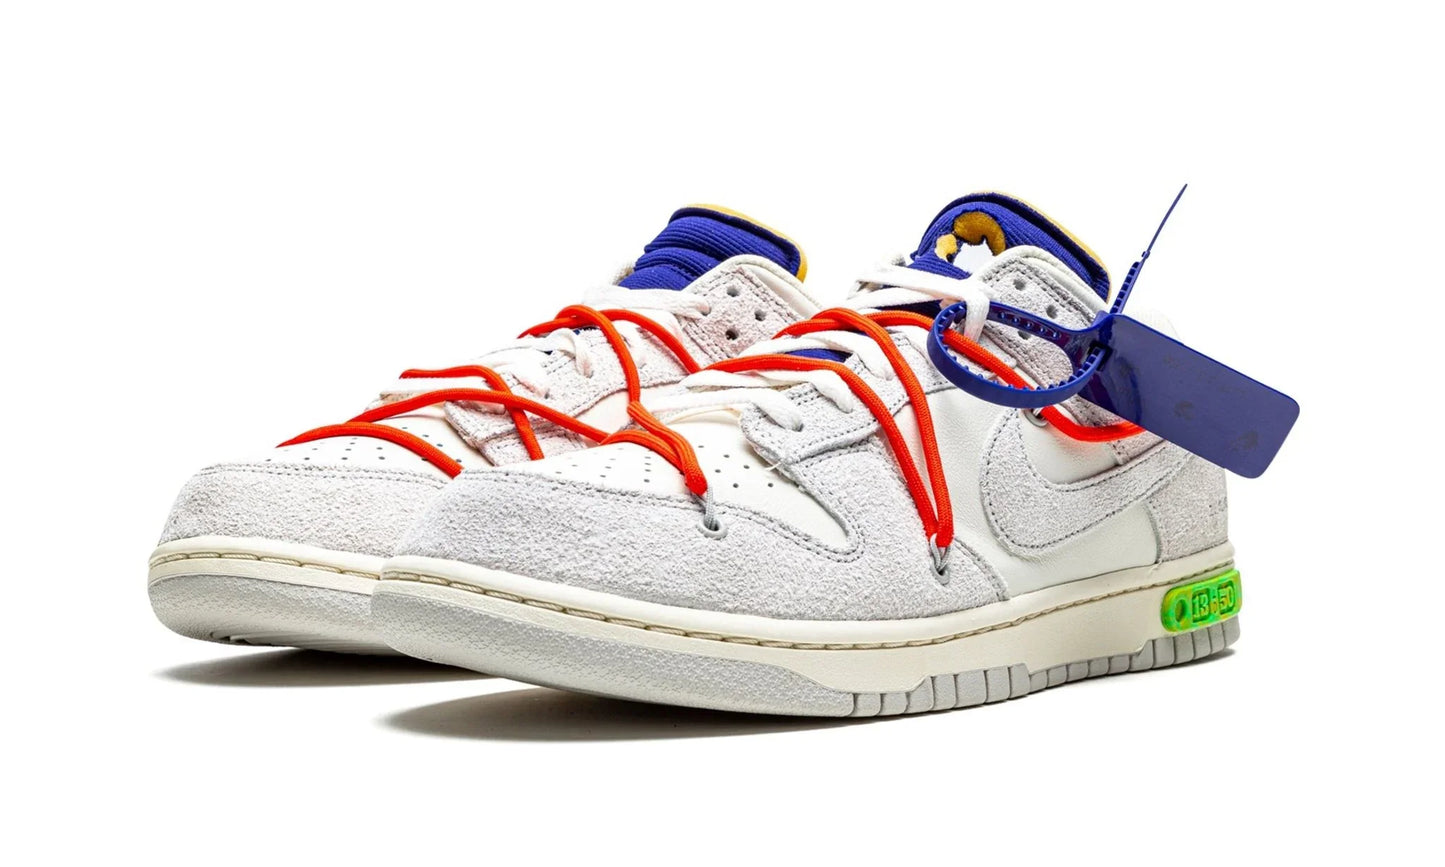 NIKE X OFF-WHITE DUNK LOW "Off-White - Lot 13"